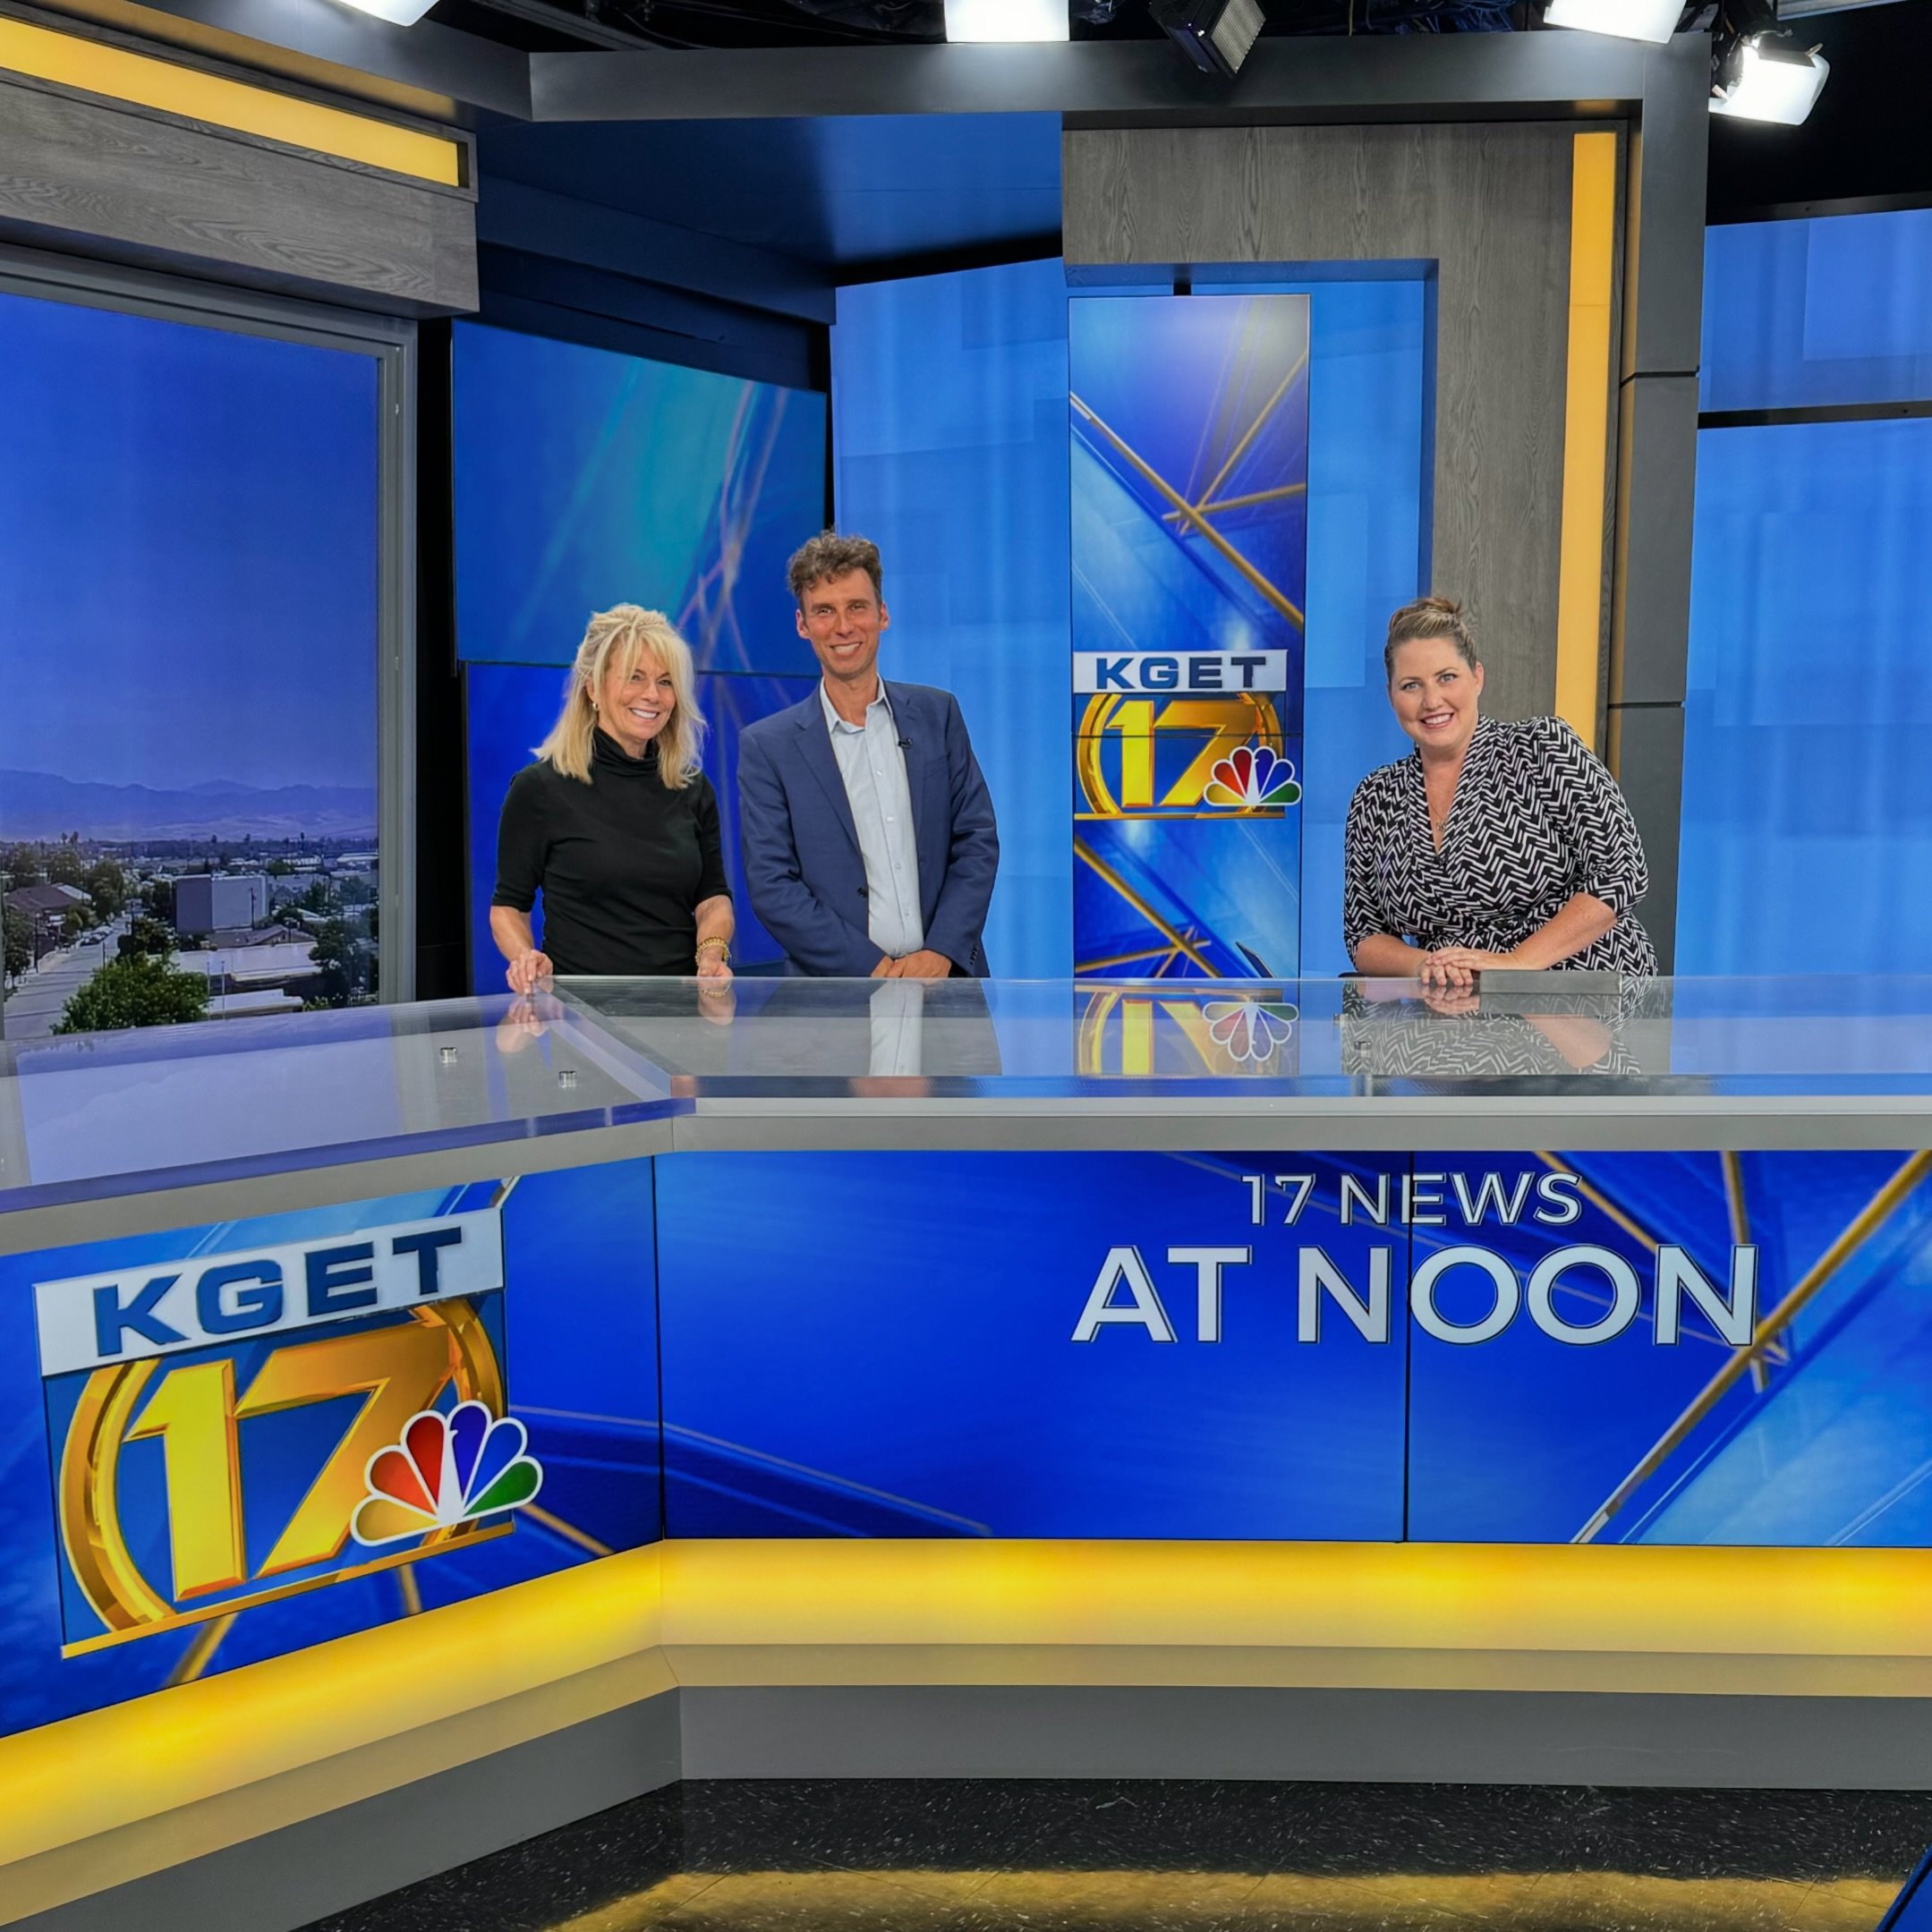 News at Noon with Elaina Rusk! It&rsquo;s always a pleasure, KGET! Thank you for our interview on BSO&rsquo;s Season Finale &ldquo;Scheherazade&rdquo;, happening this Saturday May 4th!